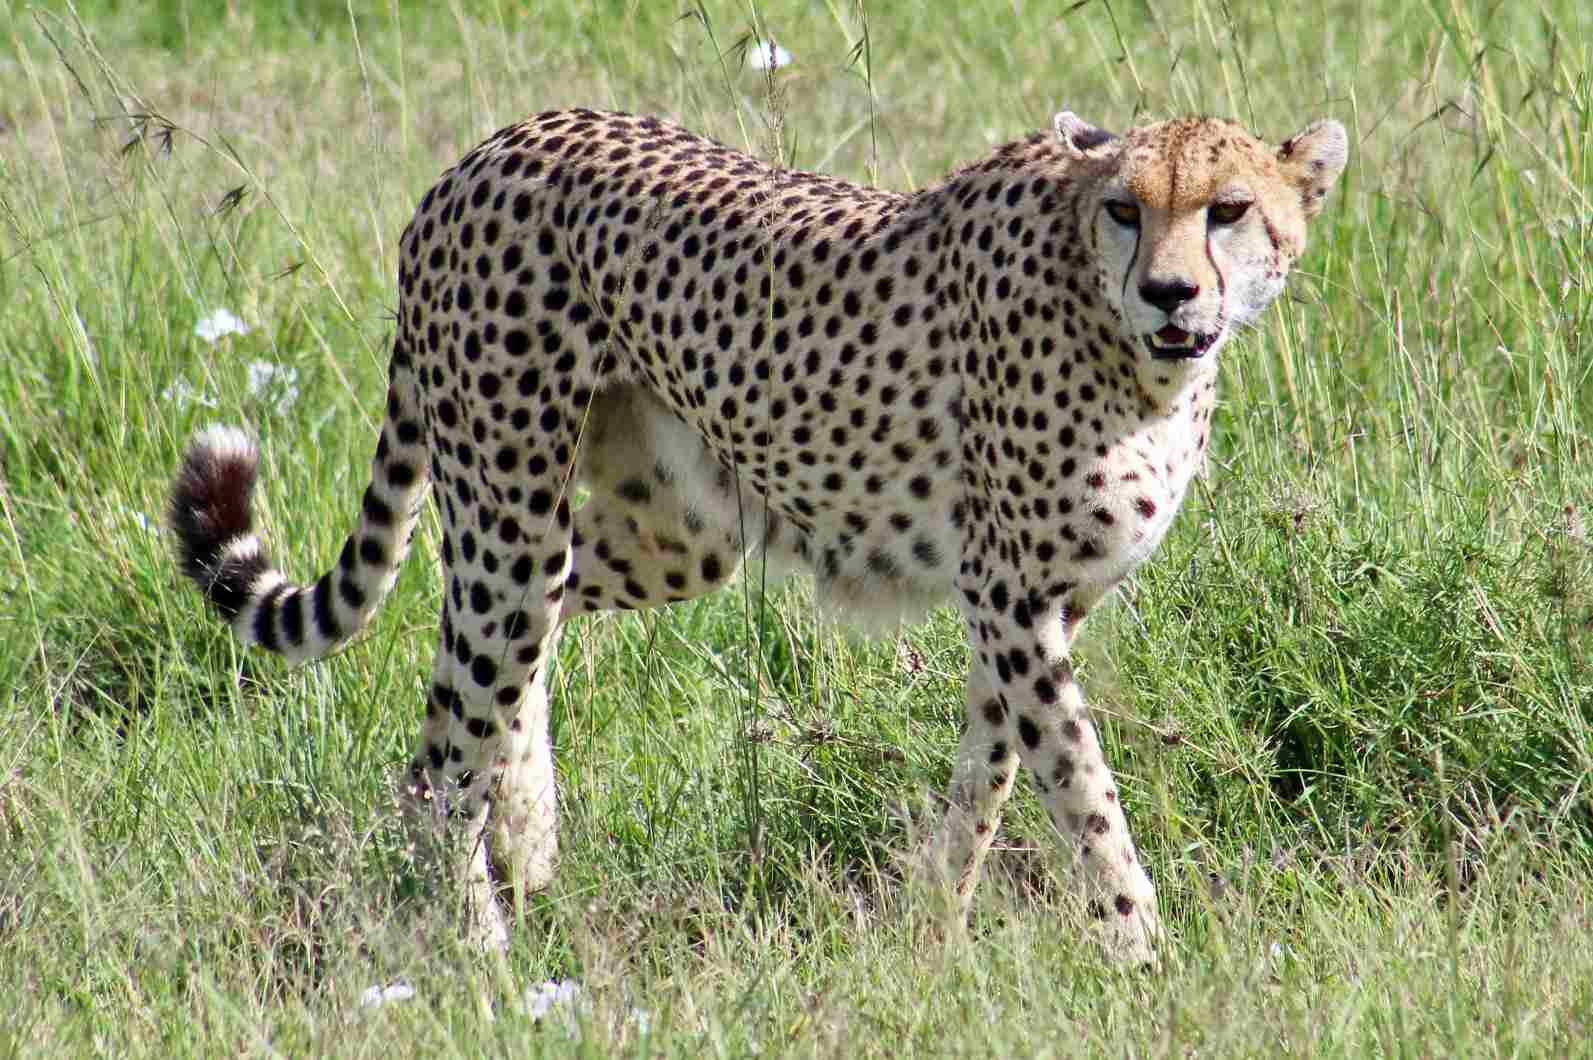 Mountain Lion Vs Cheetah: The Cheetah Can Easily be Distinguished by Its Appearance (Credit: James St. John 2022 .CC BY 2.0.)